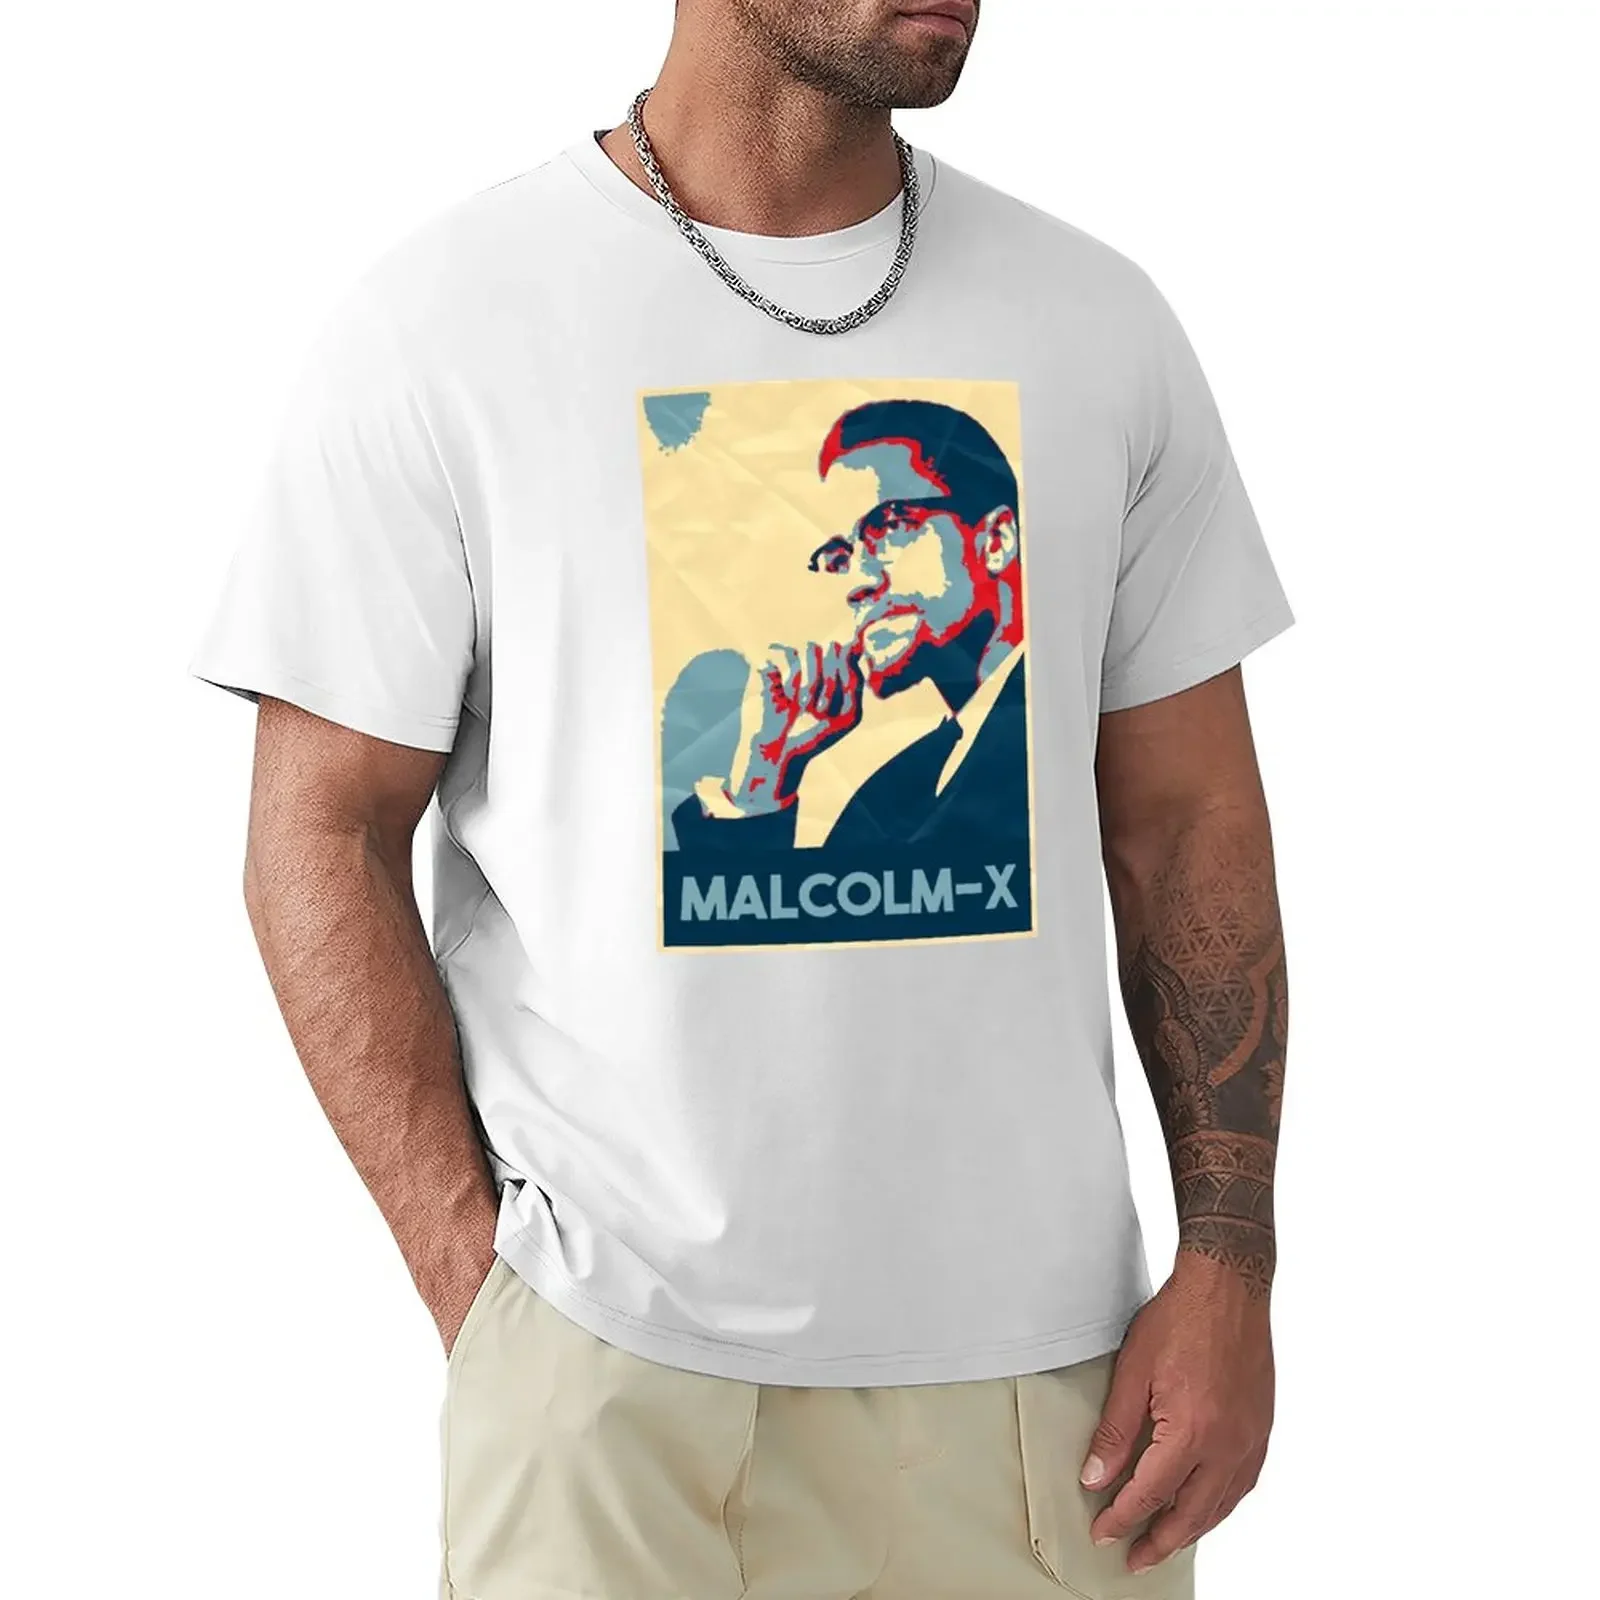 

Malcolm-X Black History Month T-Shirt summer top tops oversizeds mens big and tall t shirts